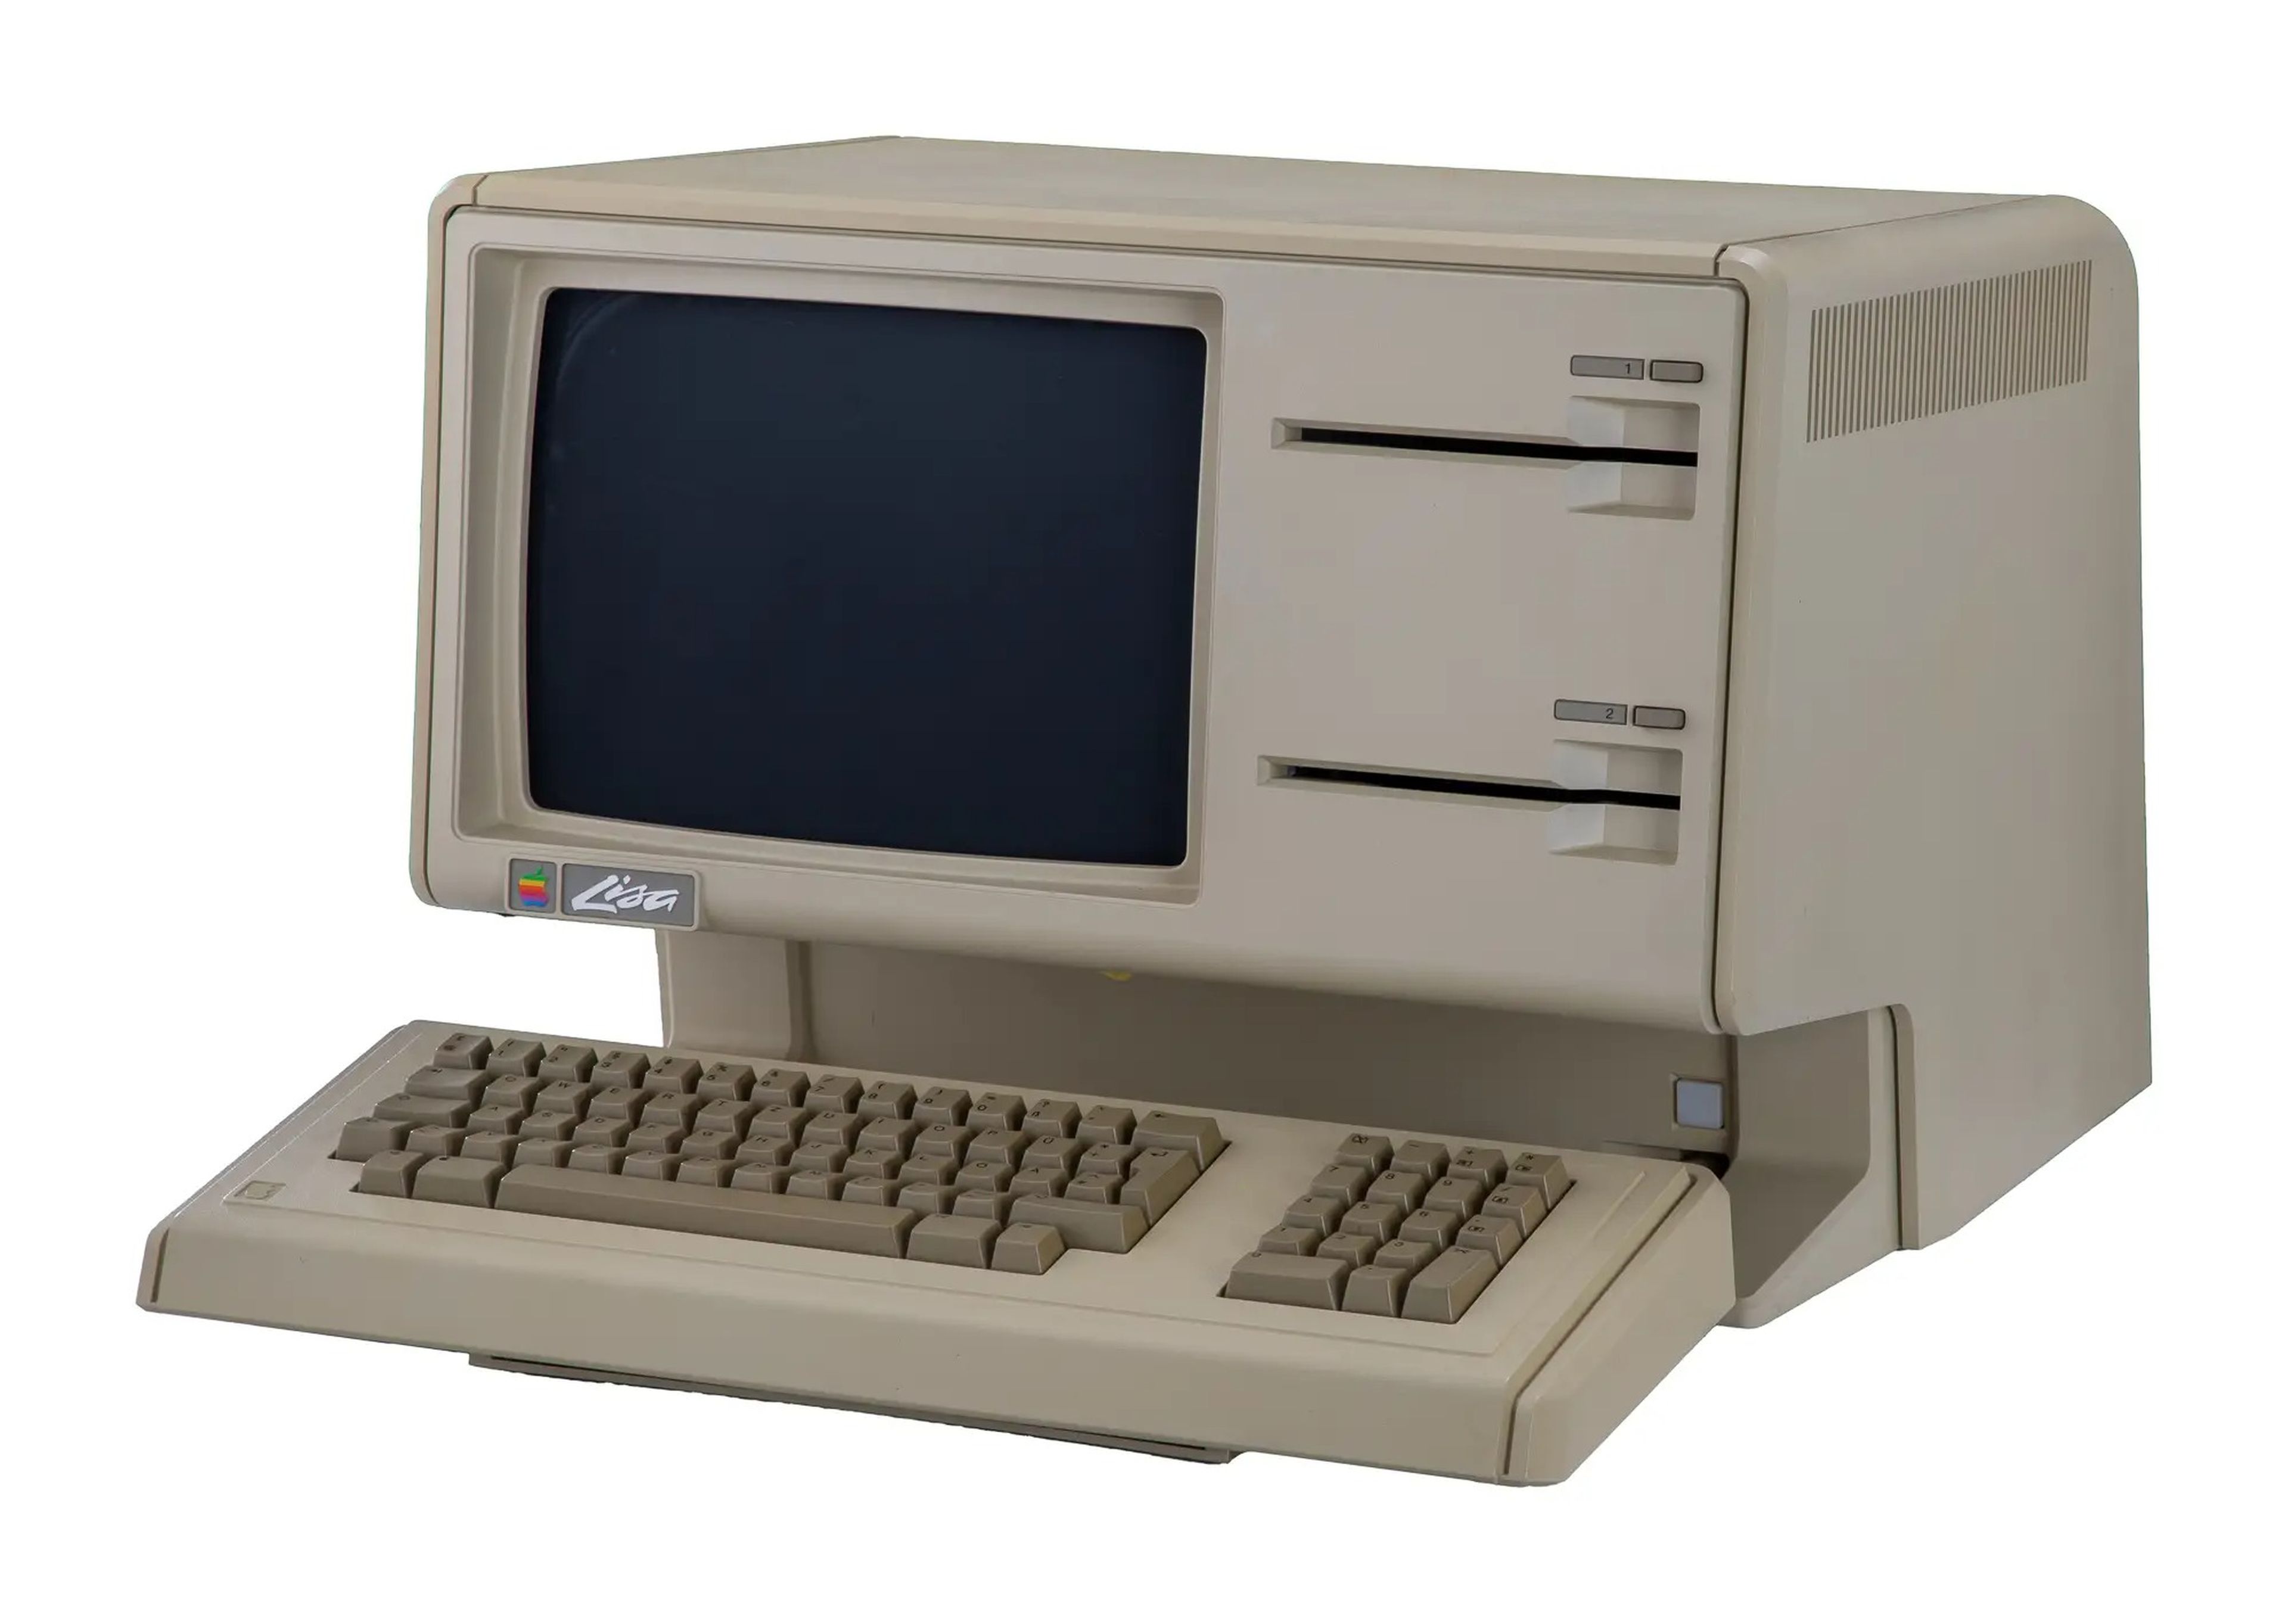 the Apple 1983 Lisa I Computer with a screen on the left and two slots on the right, a keyboard is under the screen and slots